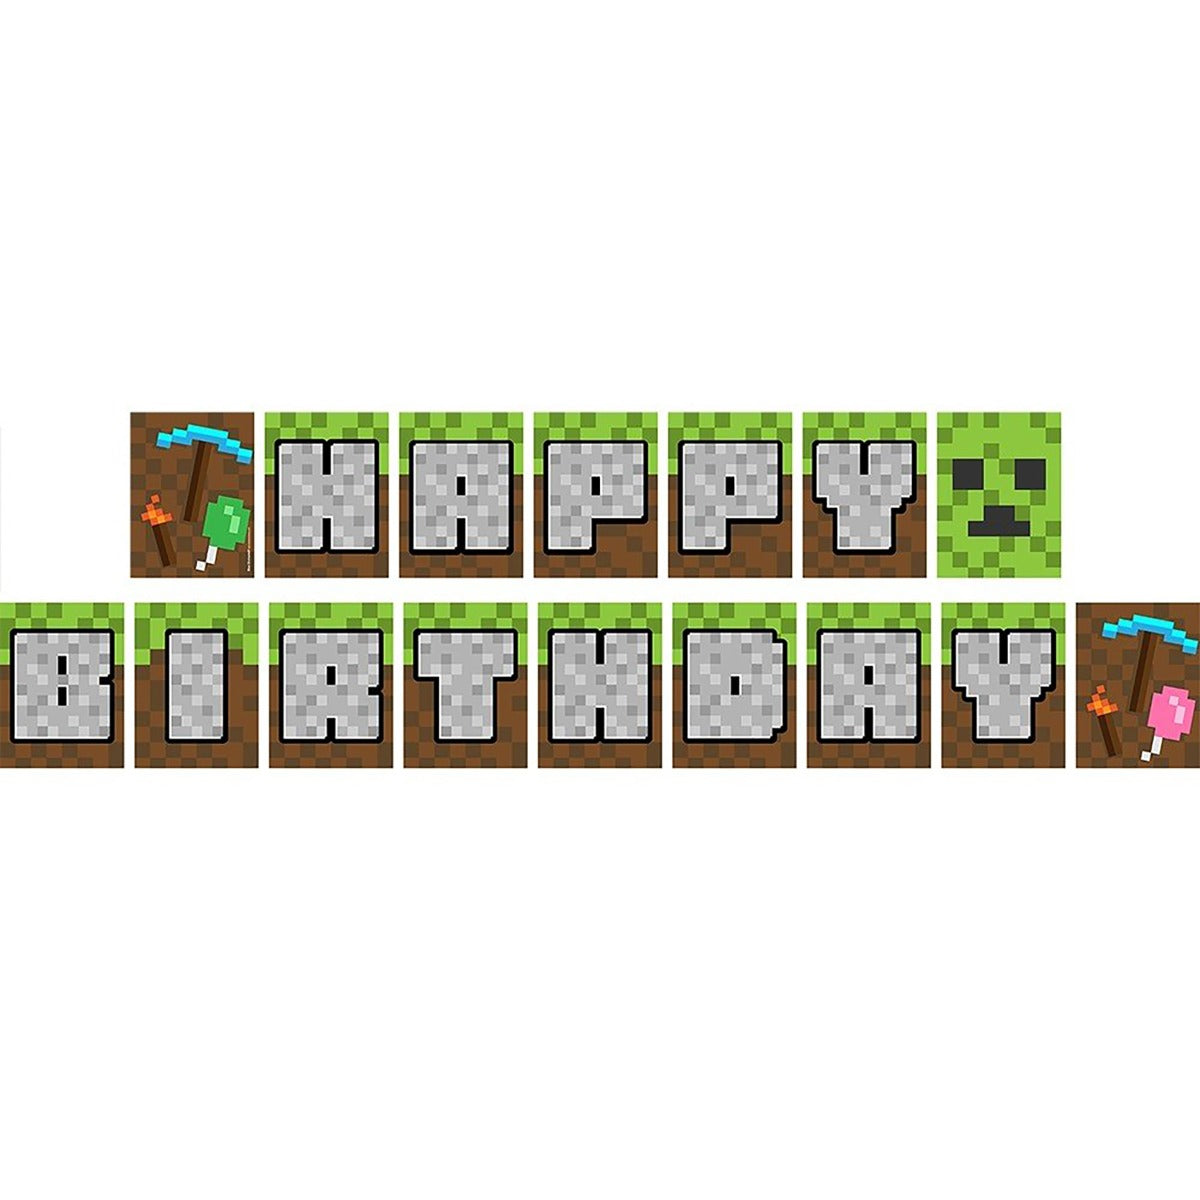 These colorful minecraft birthday banner decorations are a perfect complement to your gamer themed celebration. They will surely be a hit to your guests and will turn your dream gamer themed party into reality!